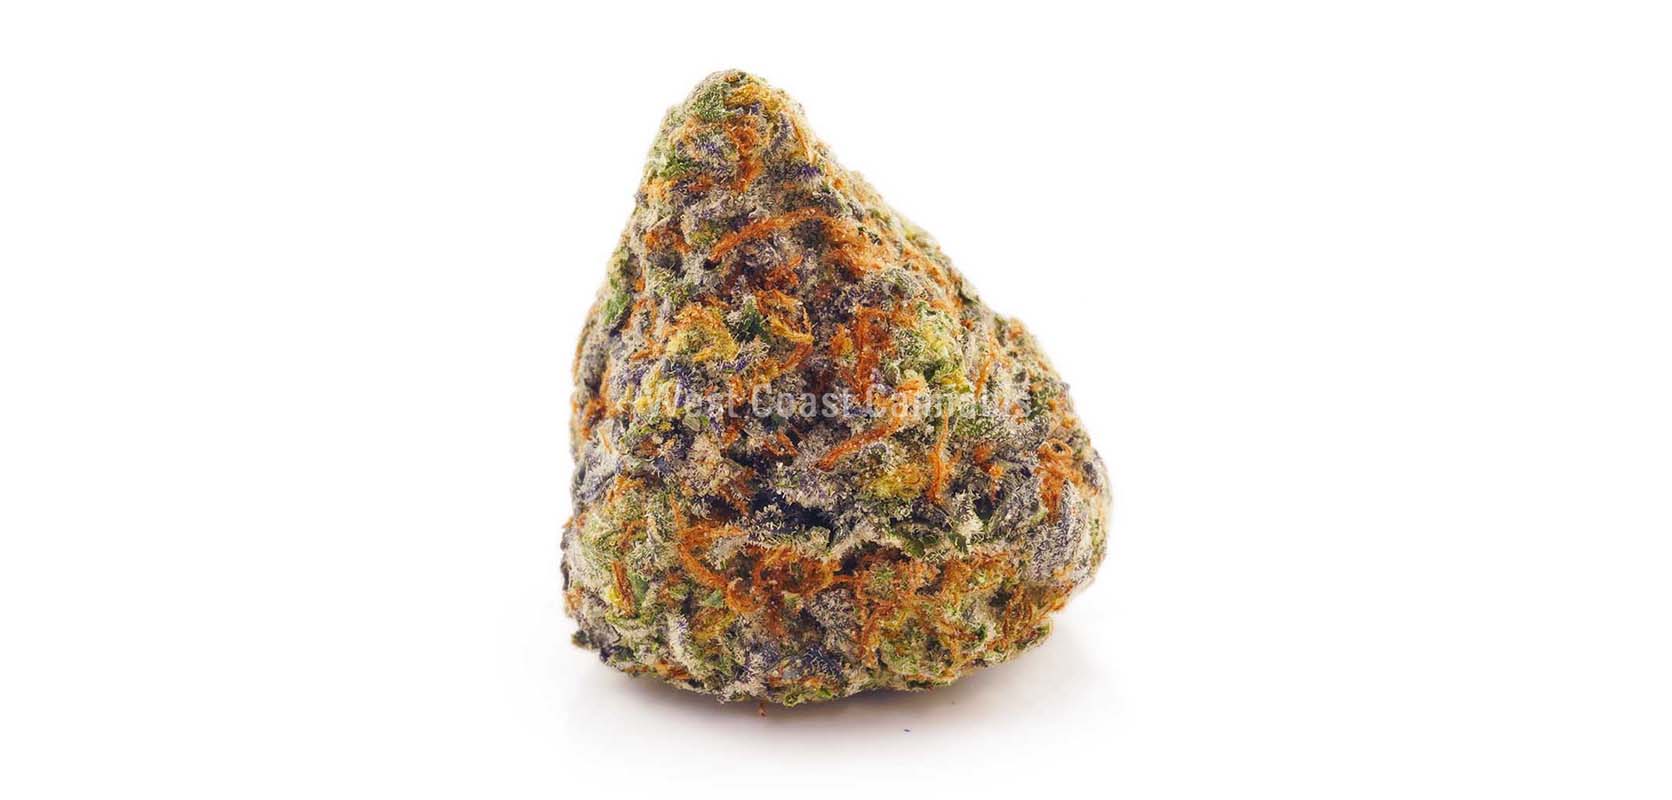 OG Kush Strain weed online Canada for sale at West Coast Cannabis dispensary for cheapweed and value buds. 